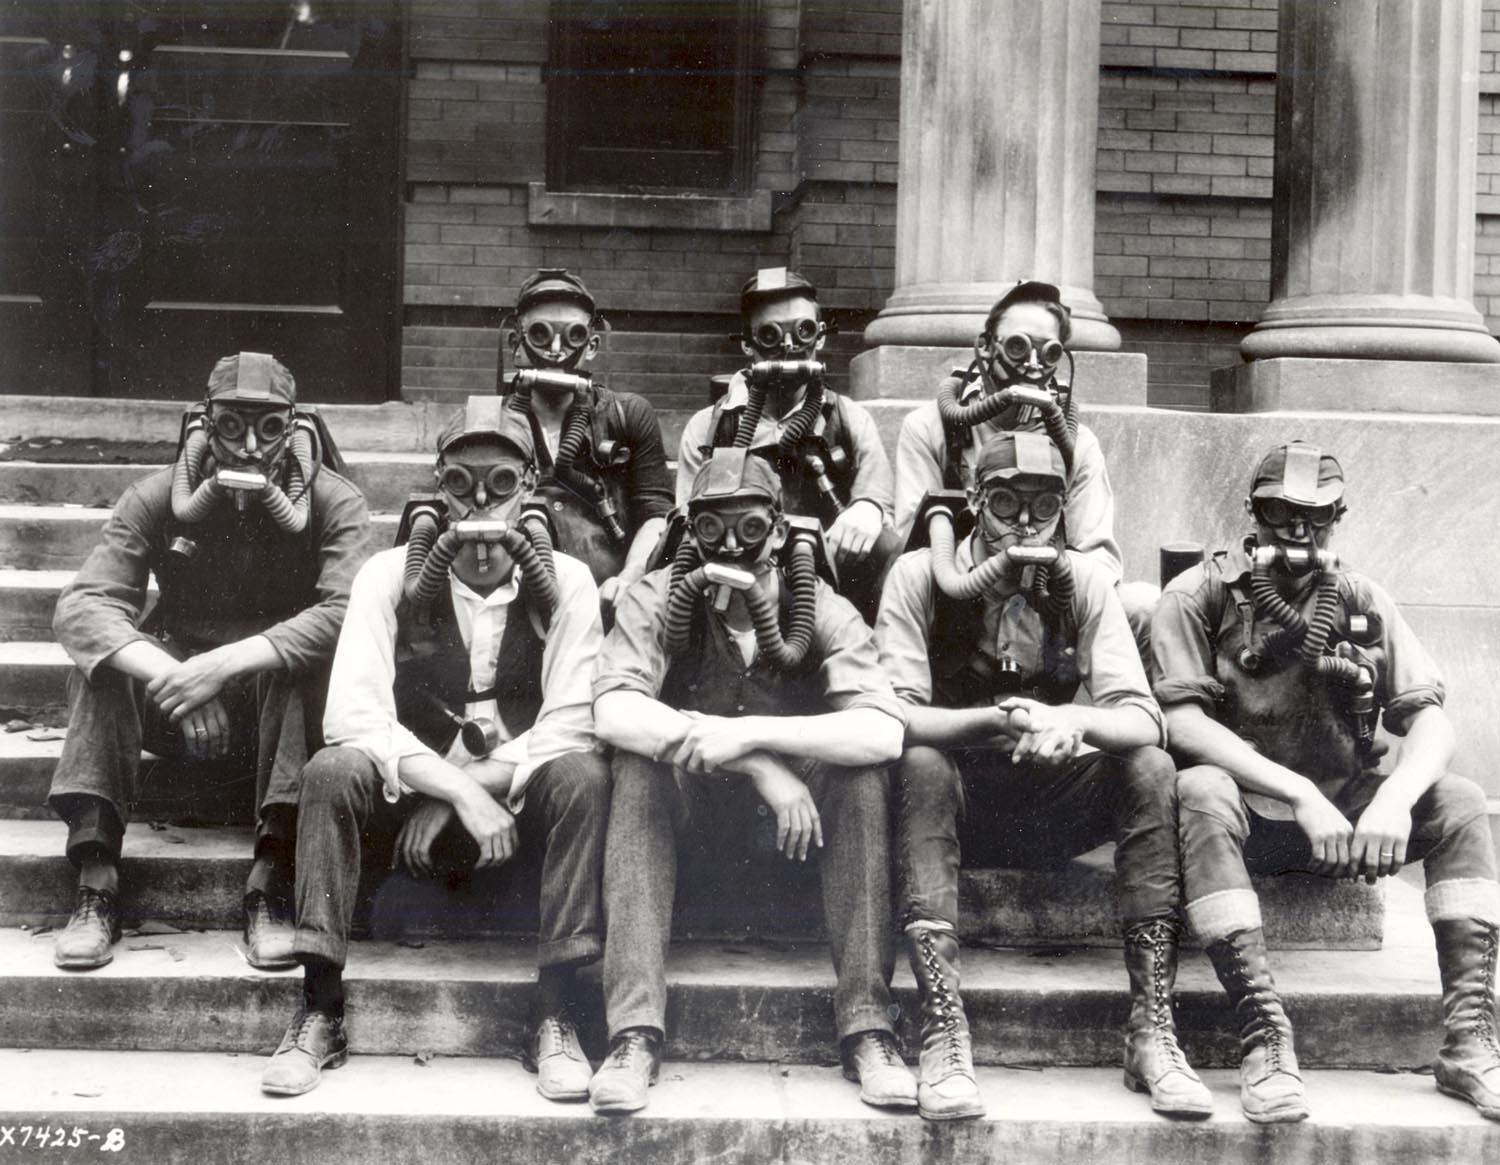 Students demonstrate gas masks during WWI